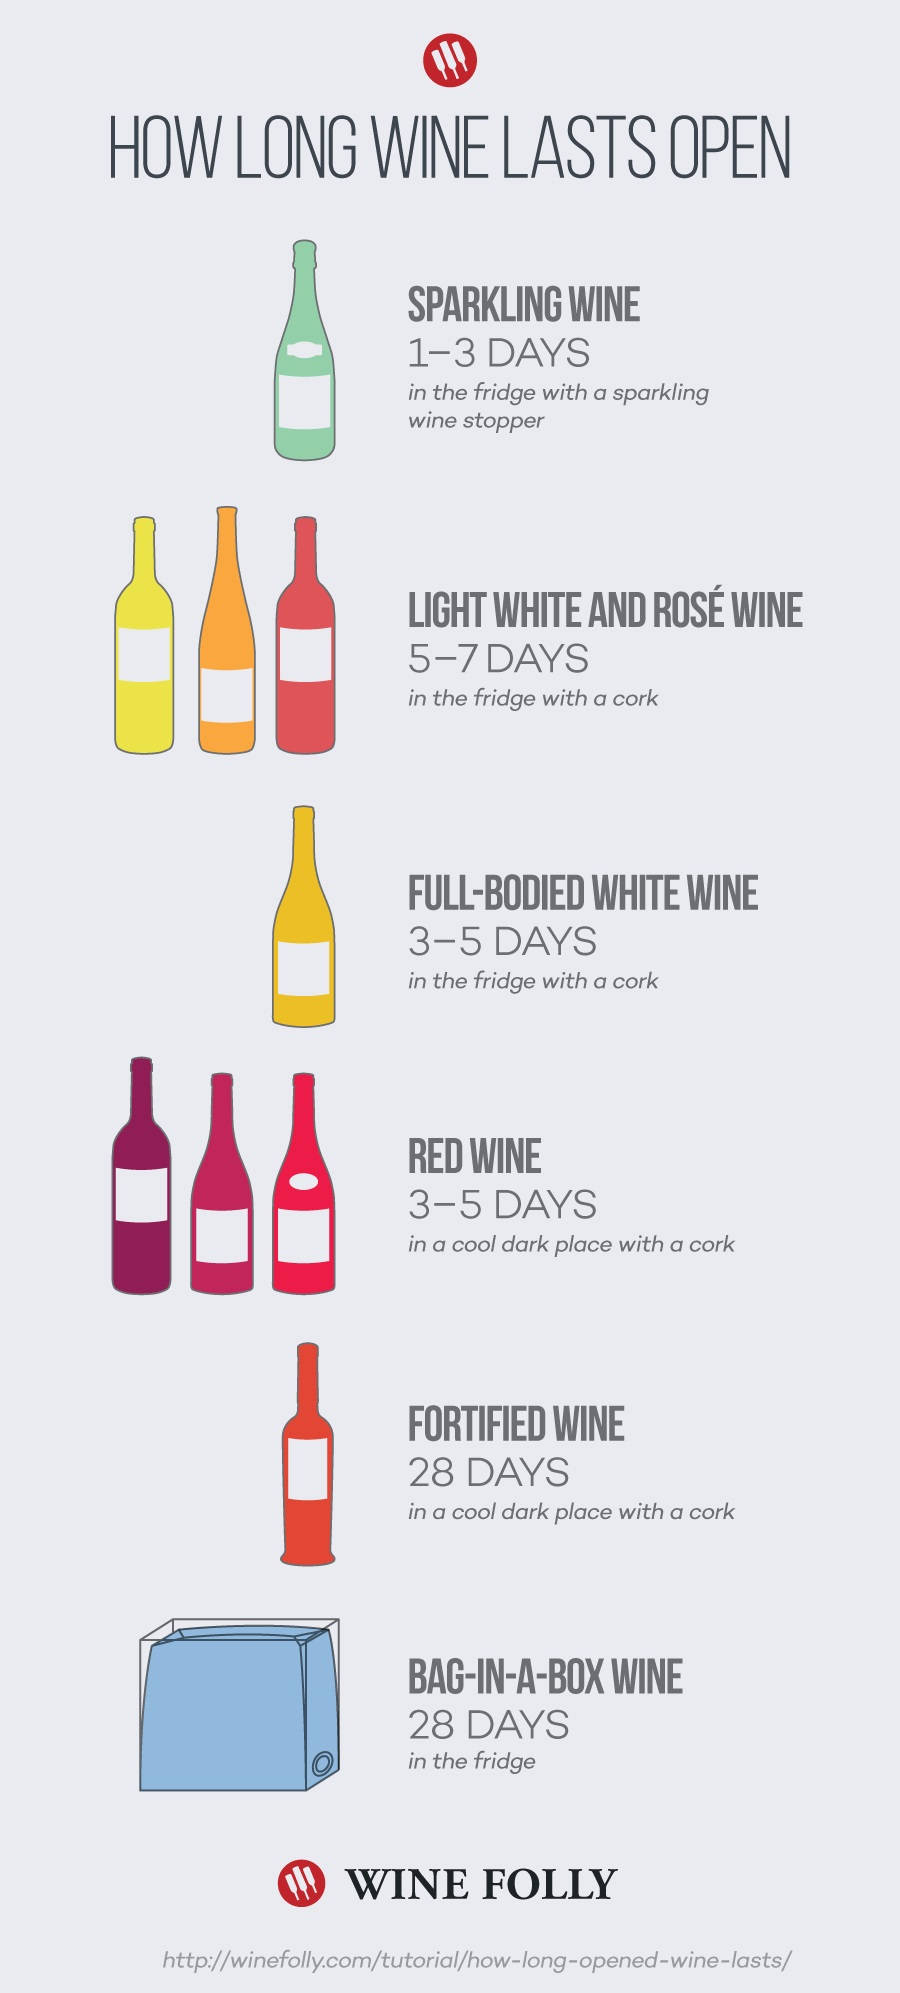 How Long Does Wine Last Opened?